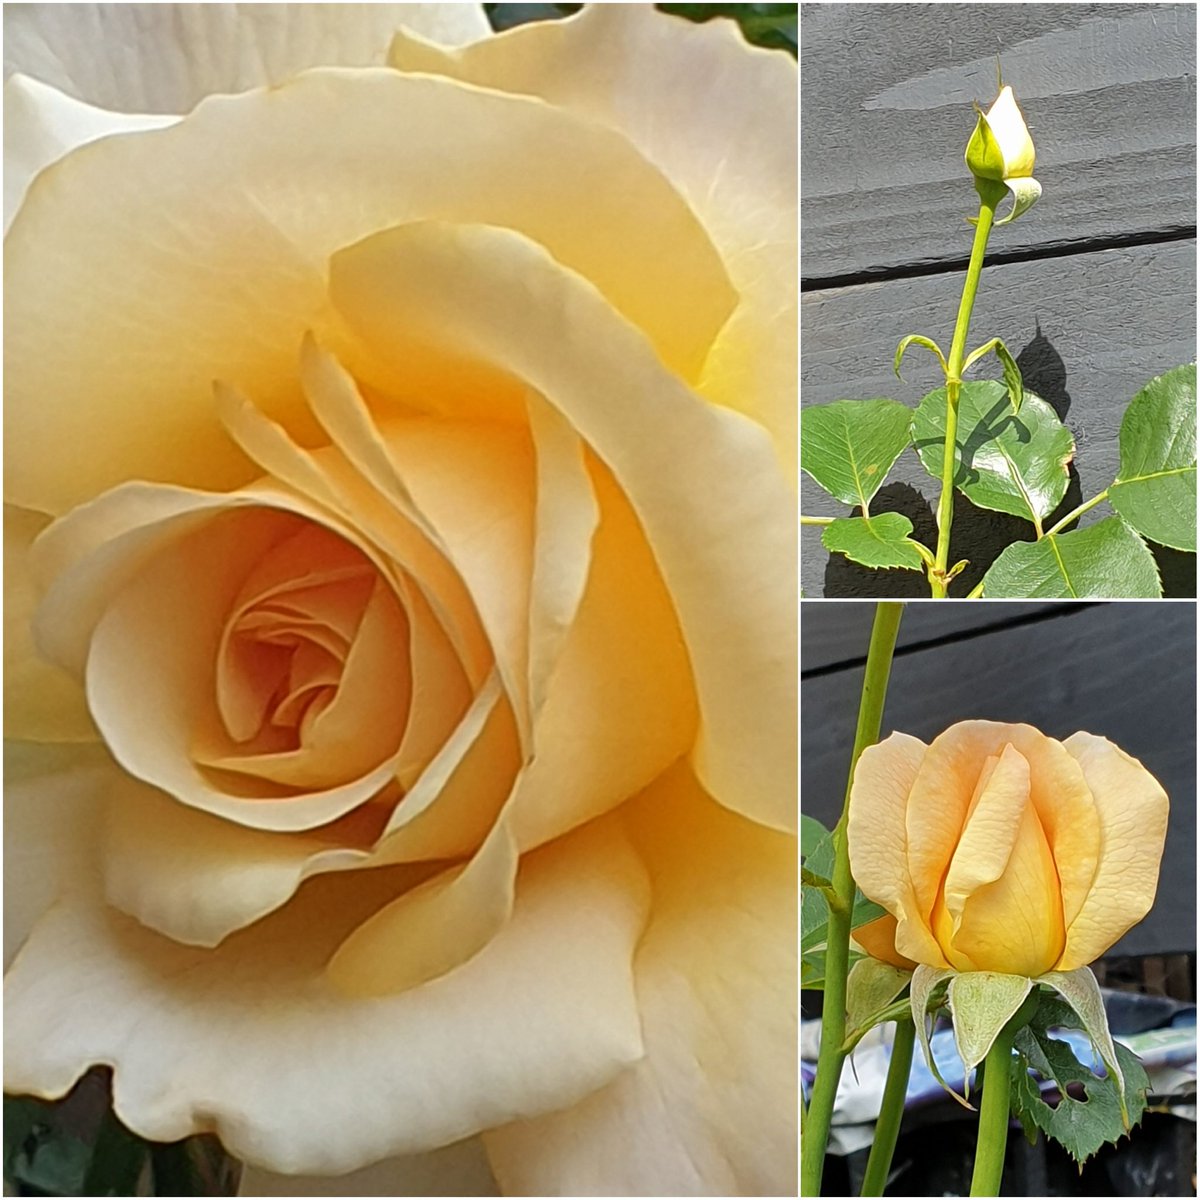 Have a lovely #RoseWednesday